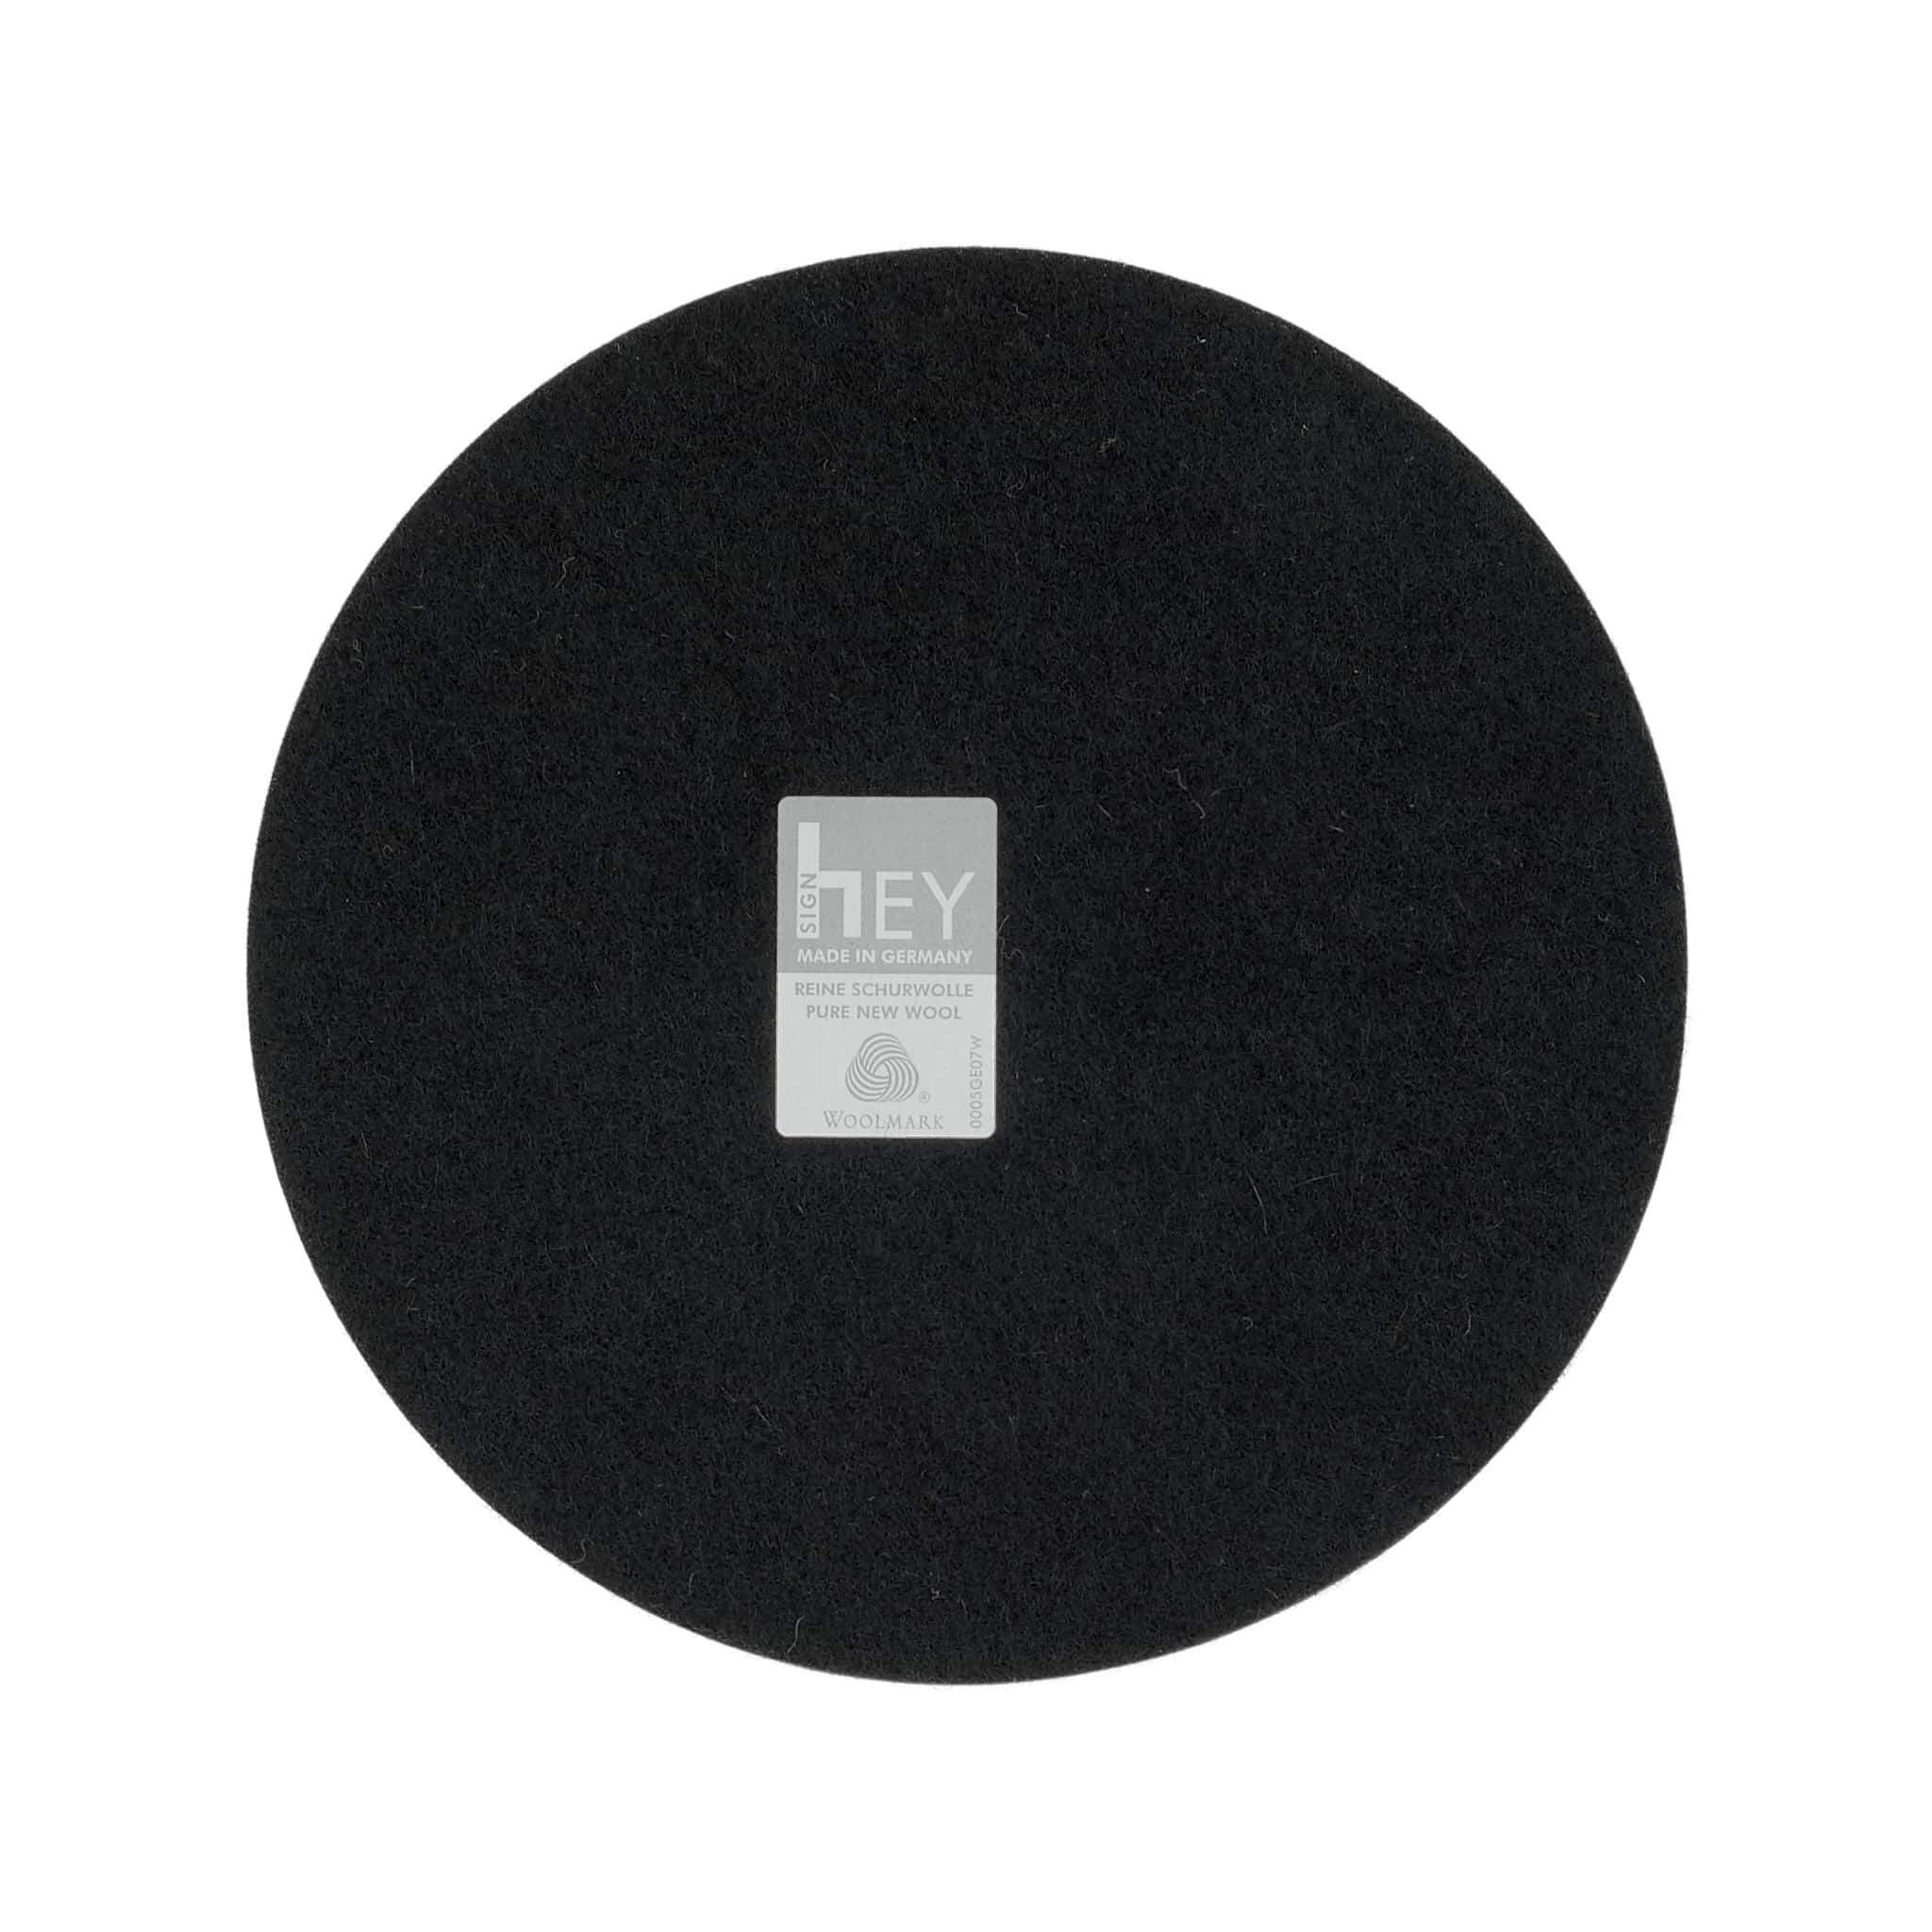 Round Felt Trivet in Black by Hey-Sign 300152002 looking at Back